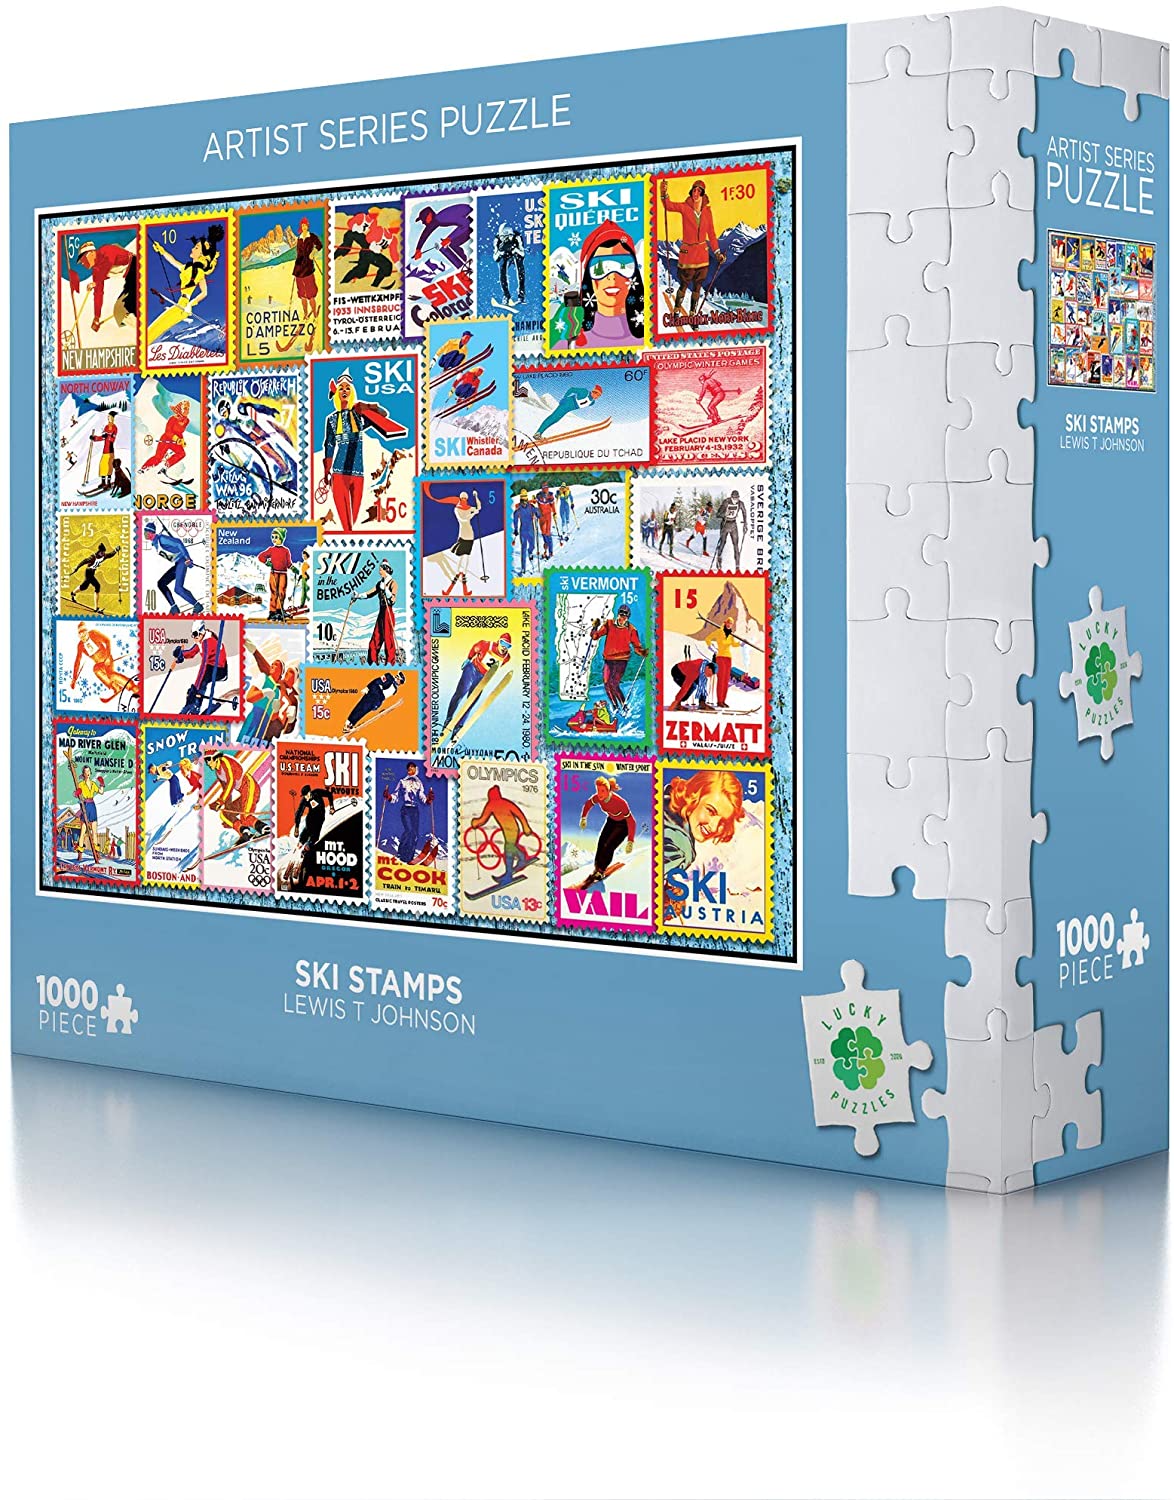 Lucky Puzzles 1000 Piece Ski Stamps Puzzle